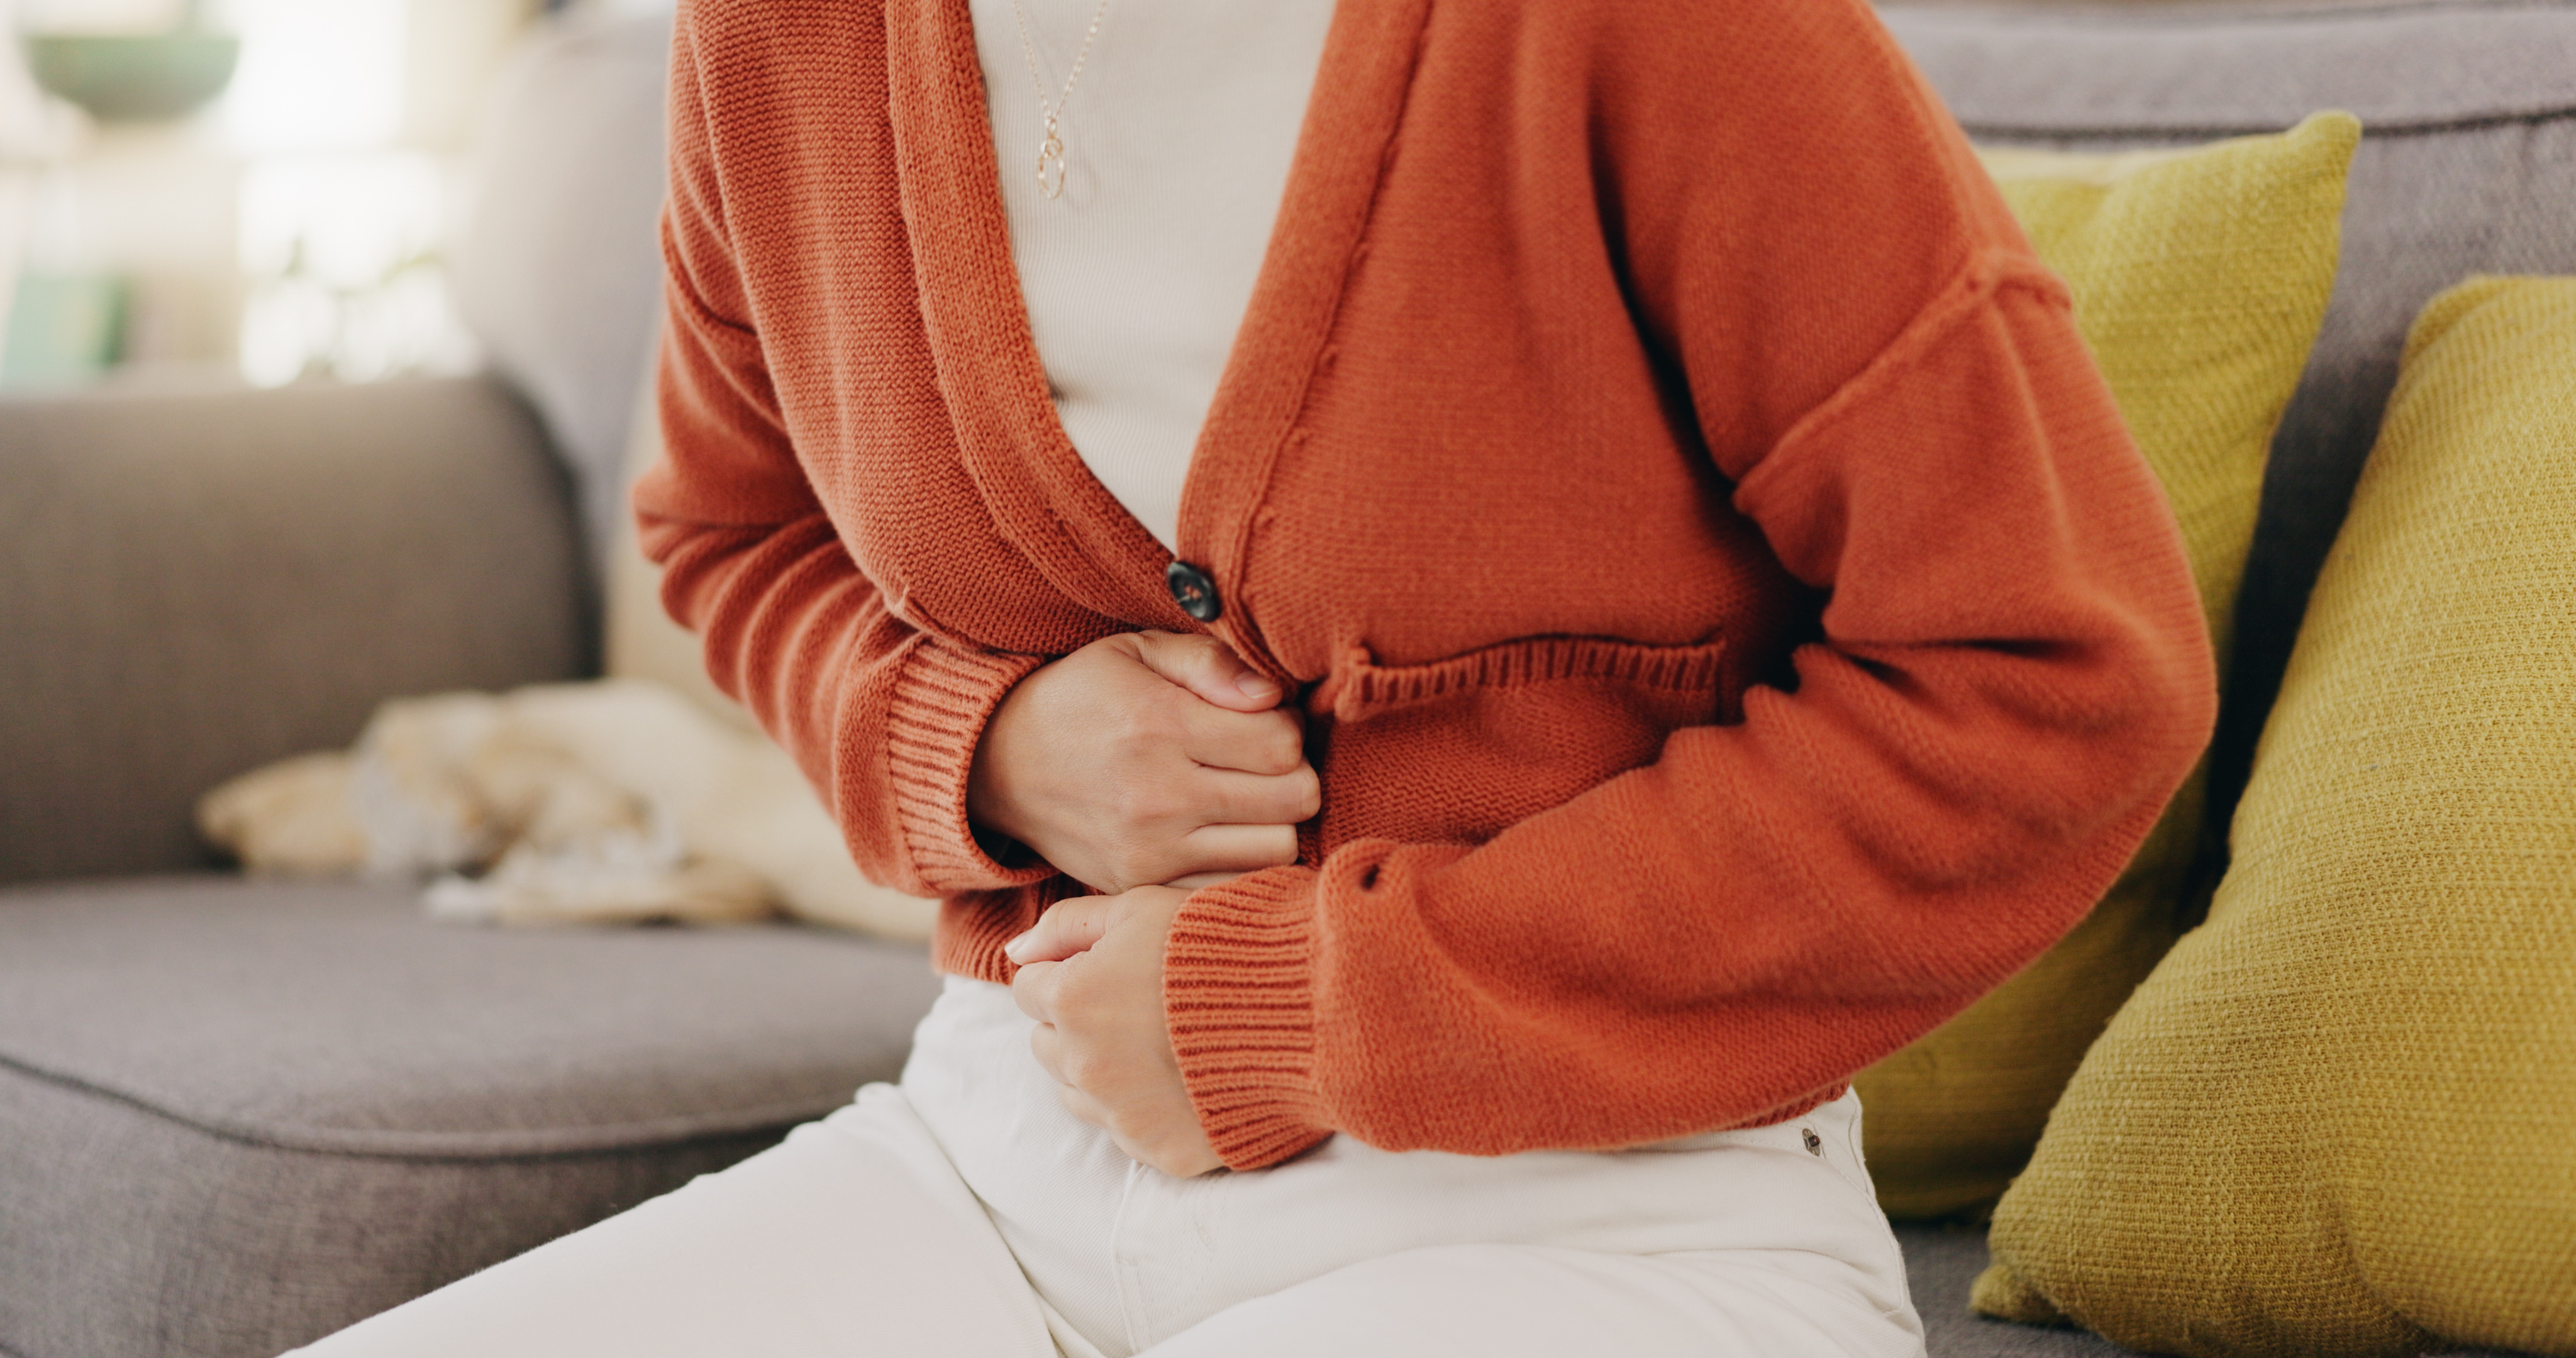 A woman experiencing stomach pain - learn how you can find relief with Vida-Flo's IV hydration treatment for gastrointestinal diseases in Johns Creek, GA.